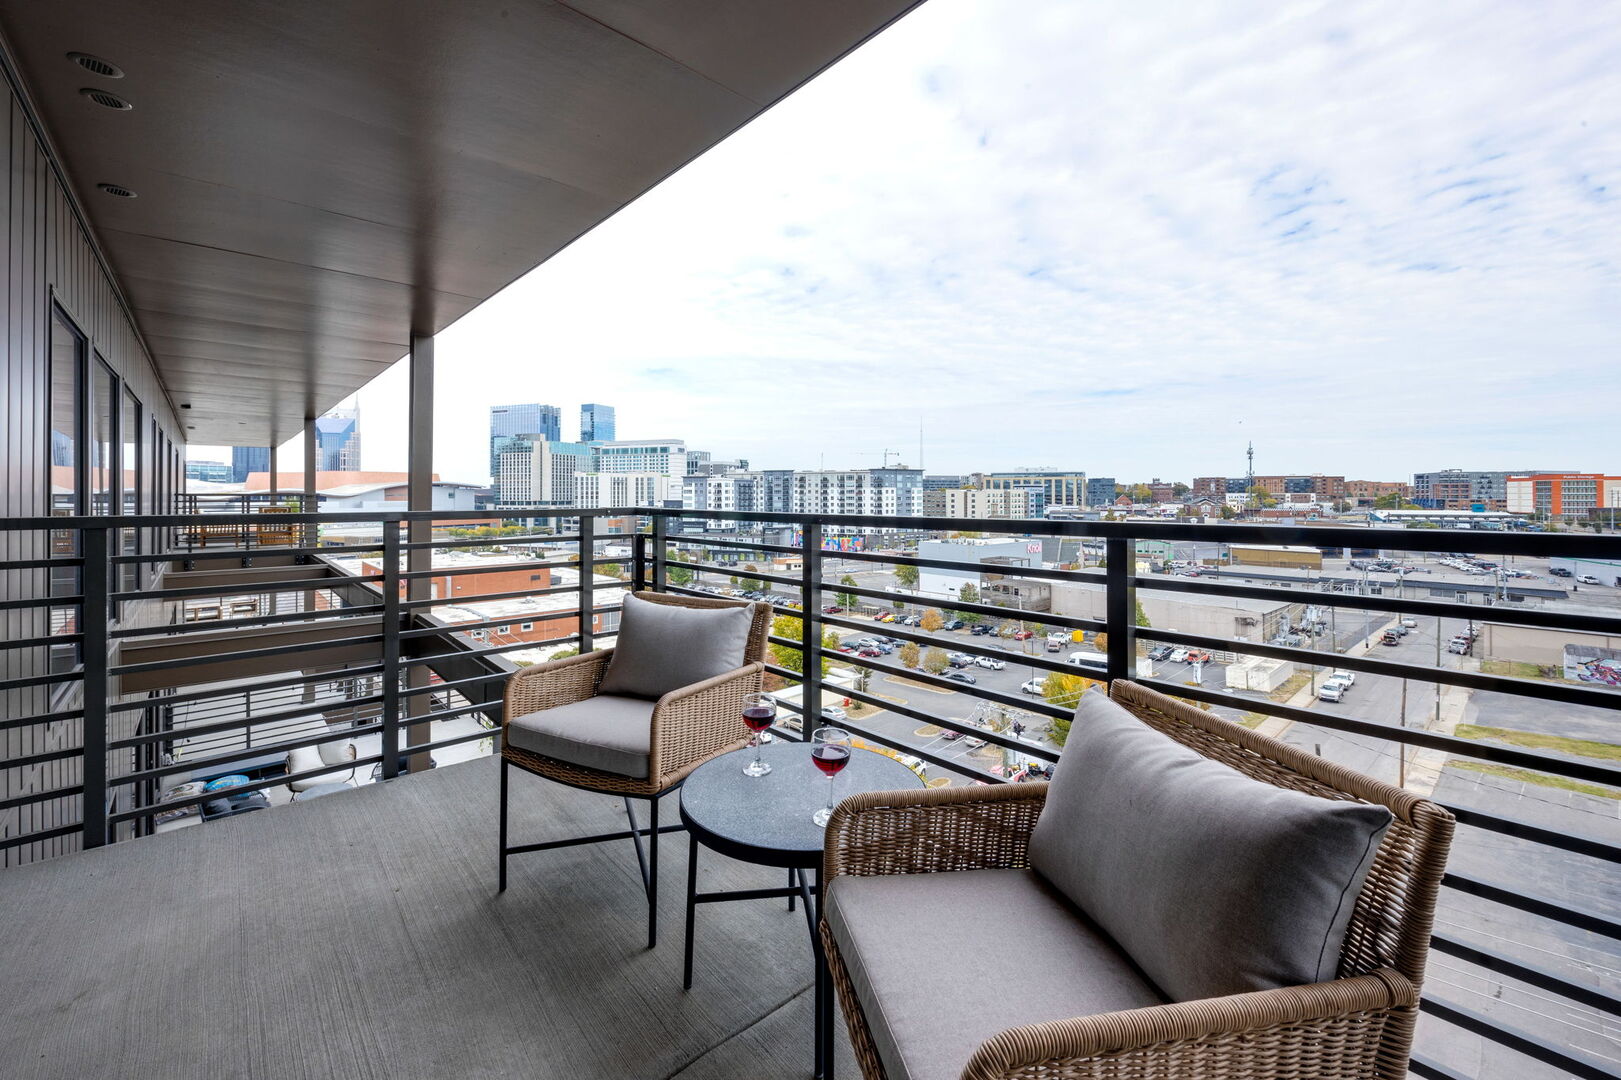 Upper Level: Primary bedroom with its own private balcony overlooking the Nashville skyline.